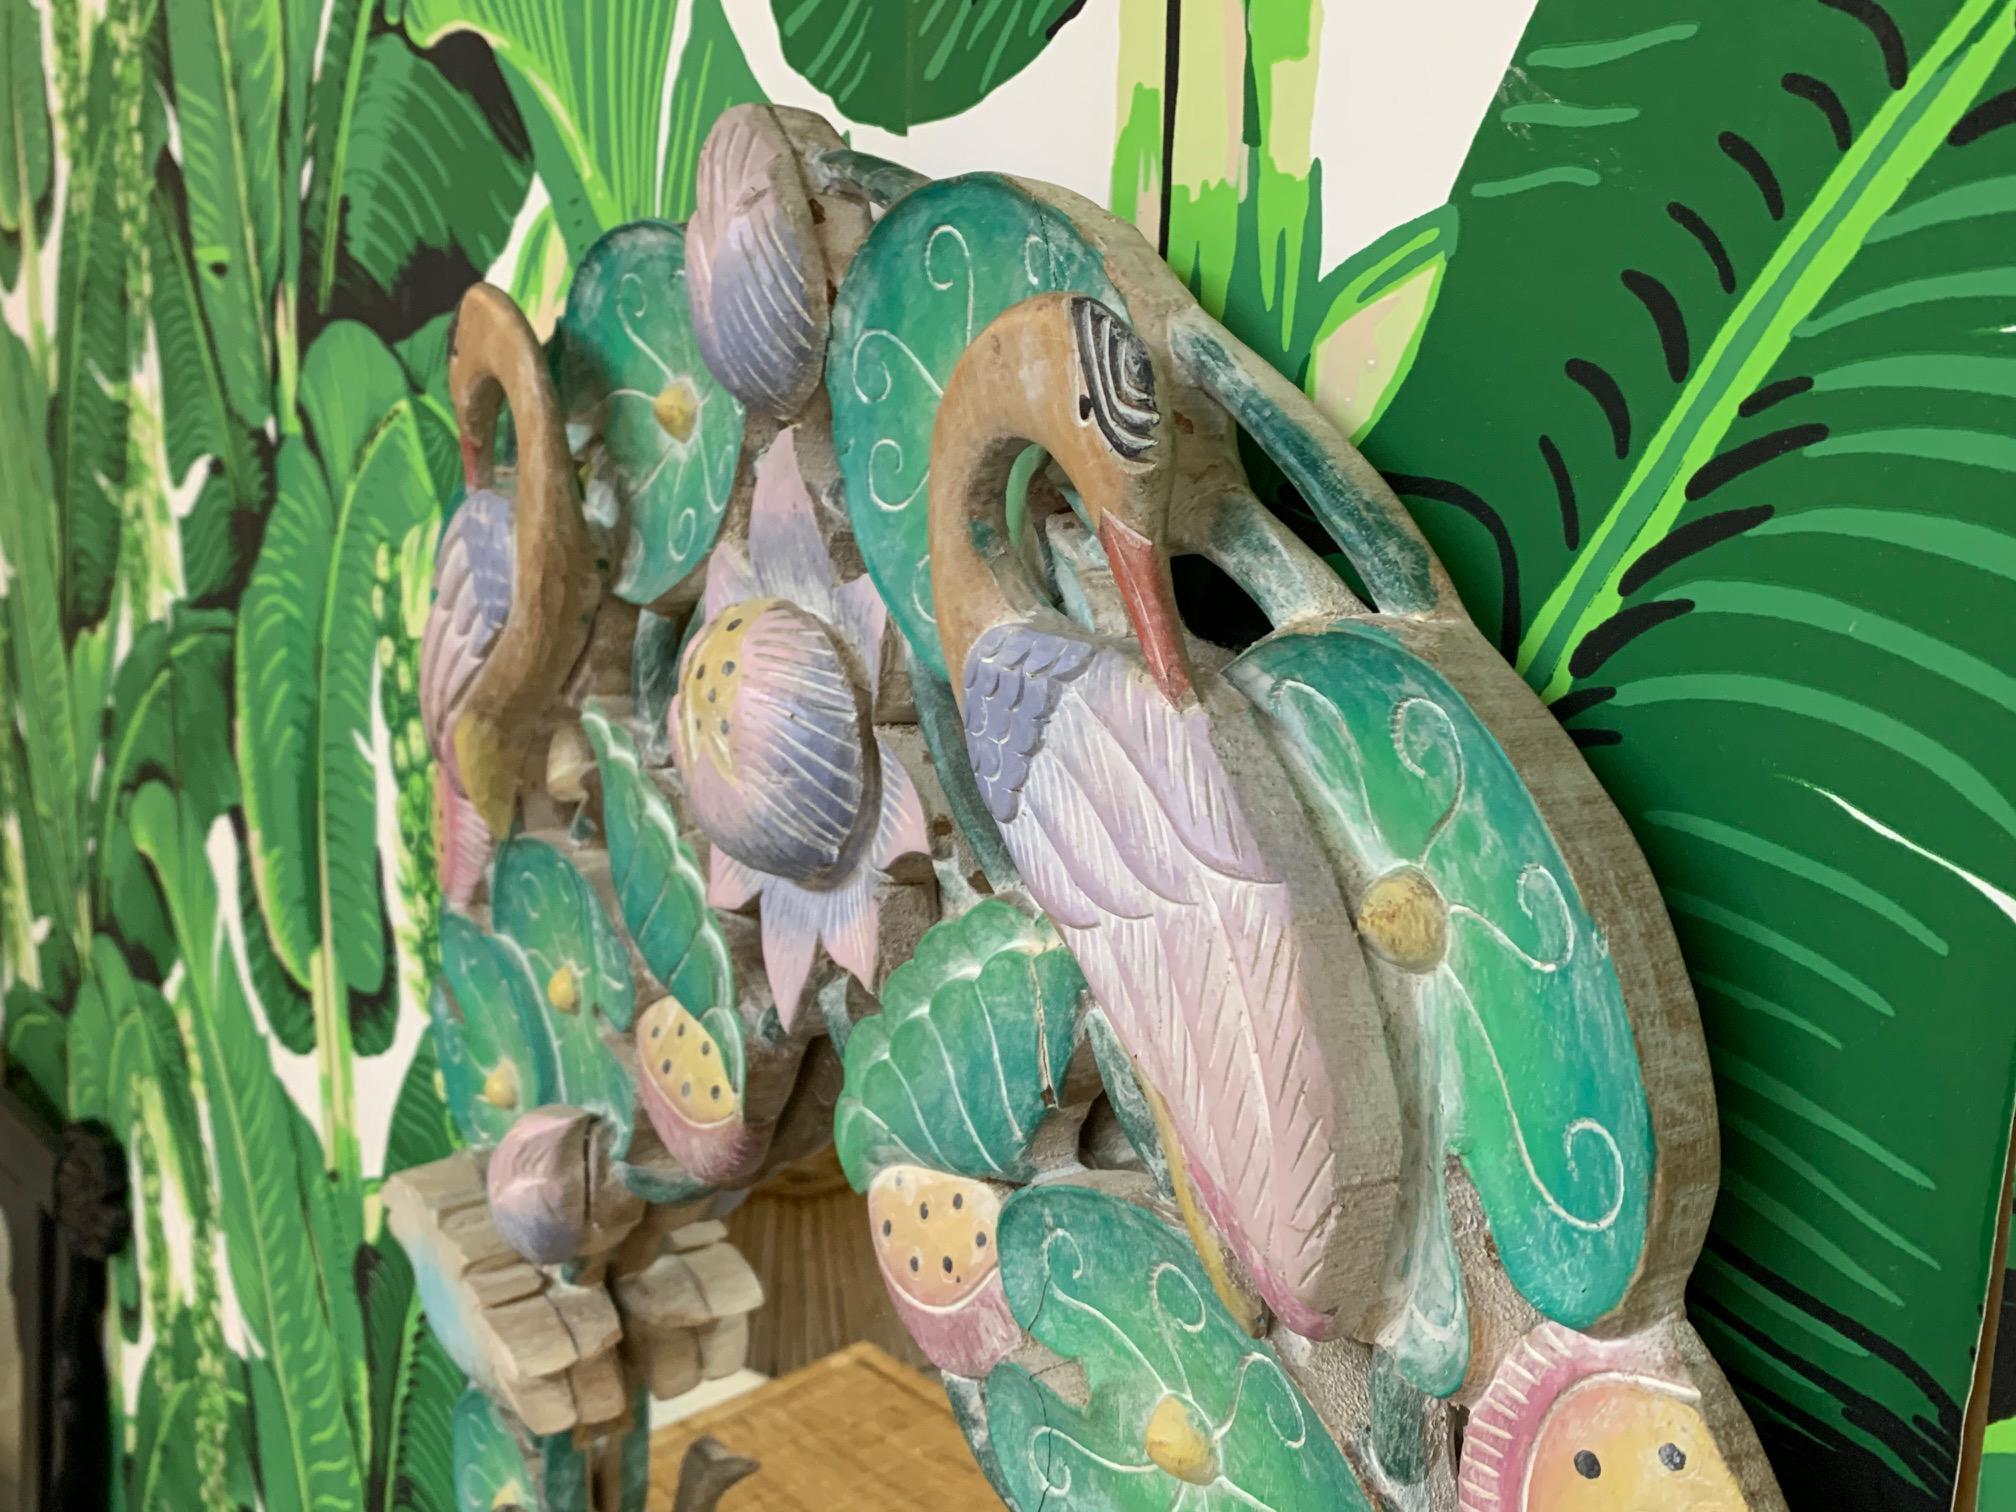 Tropical style mirror features a 3D carved wood frame with birds, lily pads, and flowers. Stands 37